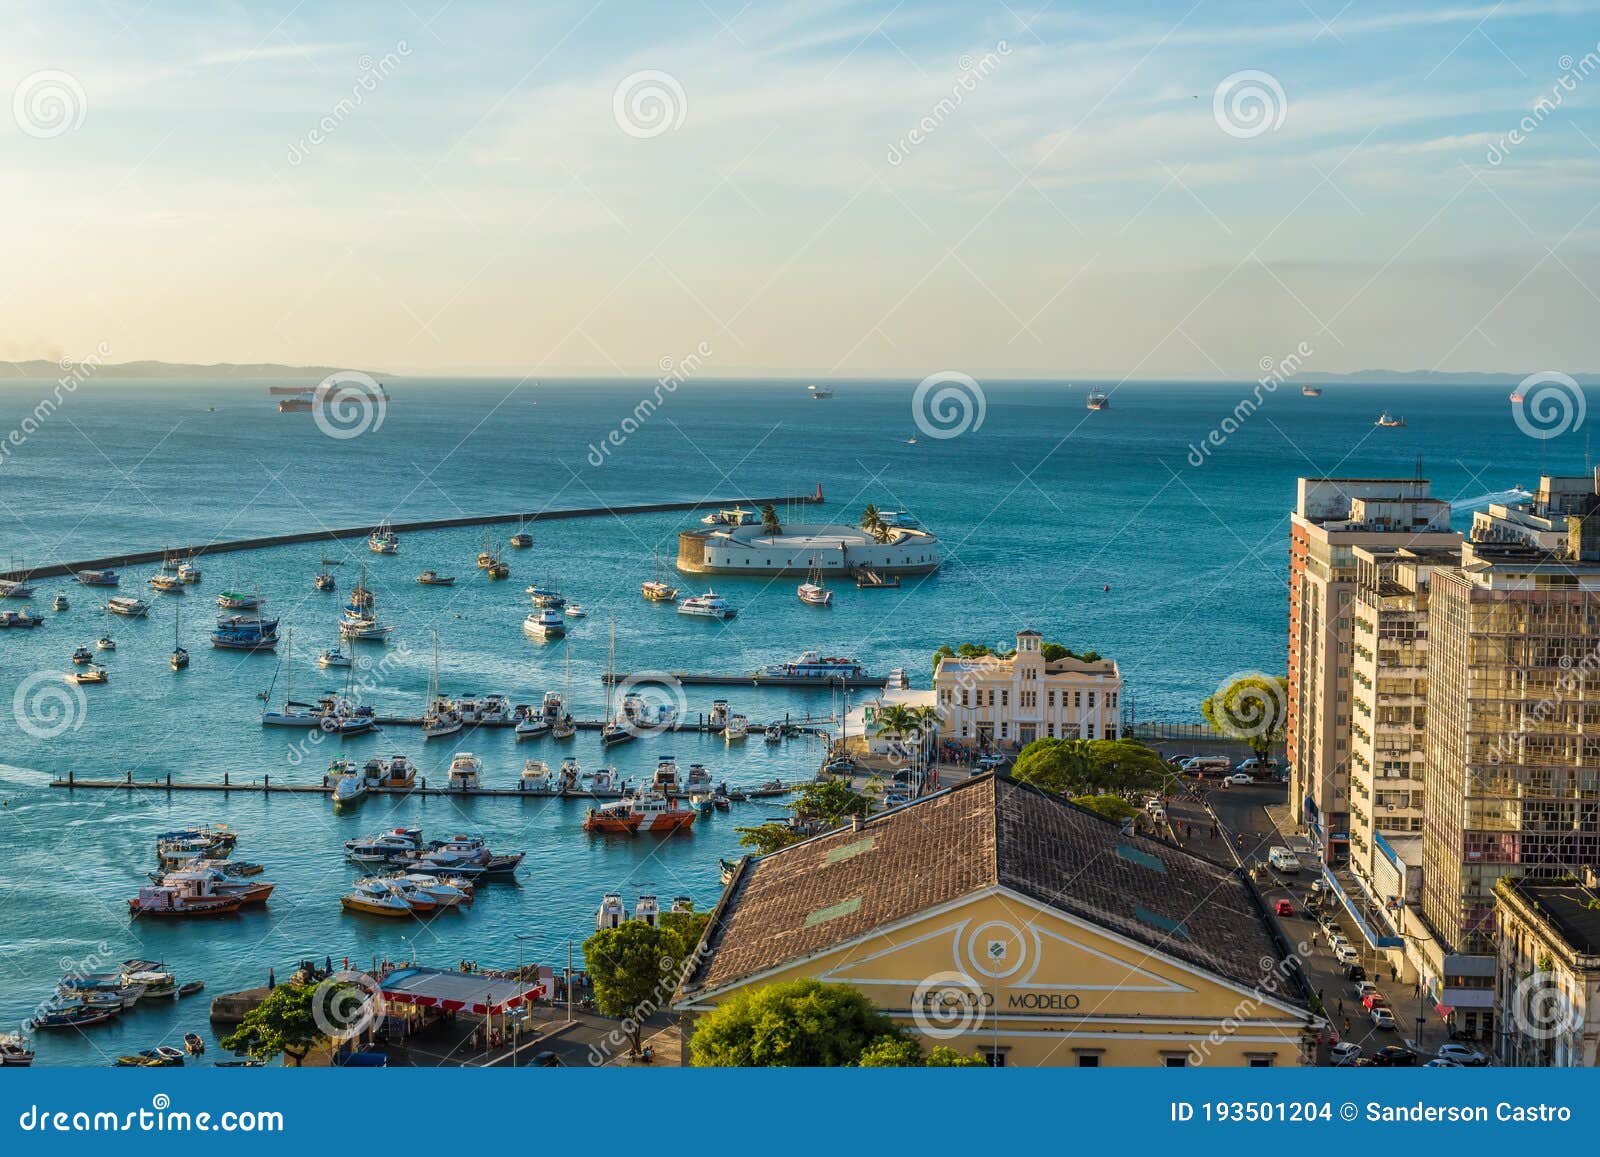 bay of all saints, the lacerda elevator viewpoint of view, with part of the building of the mercado modelo in salvador, bahia,